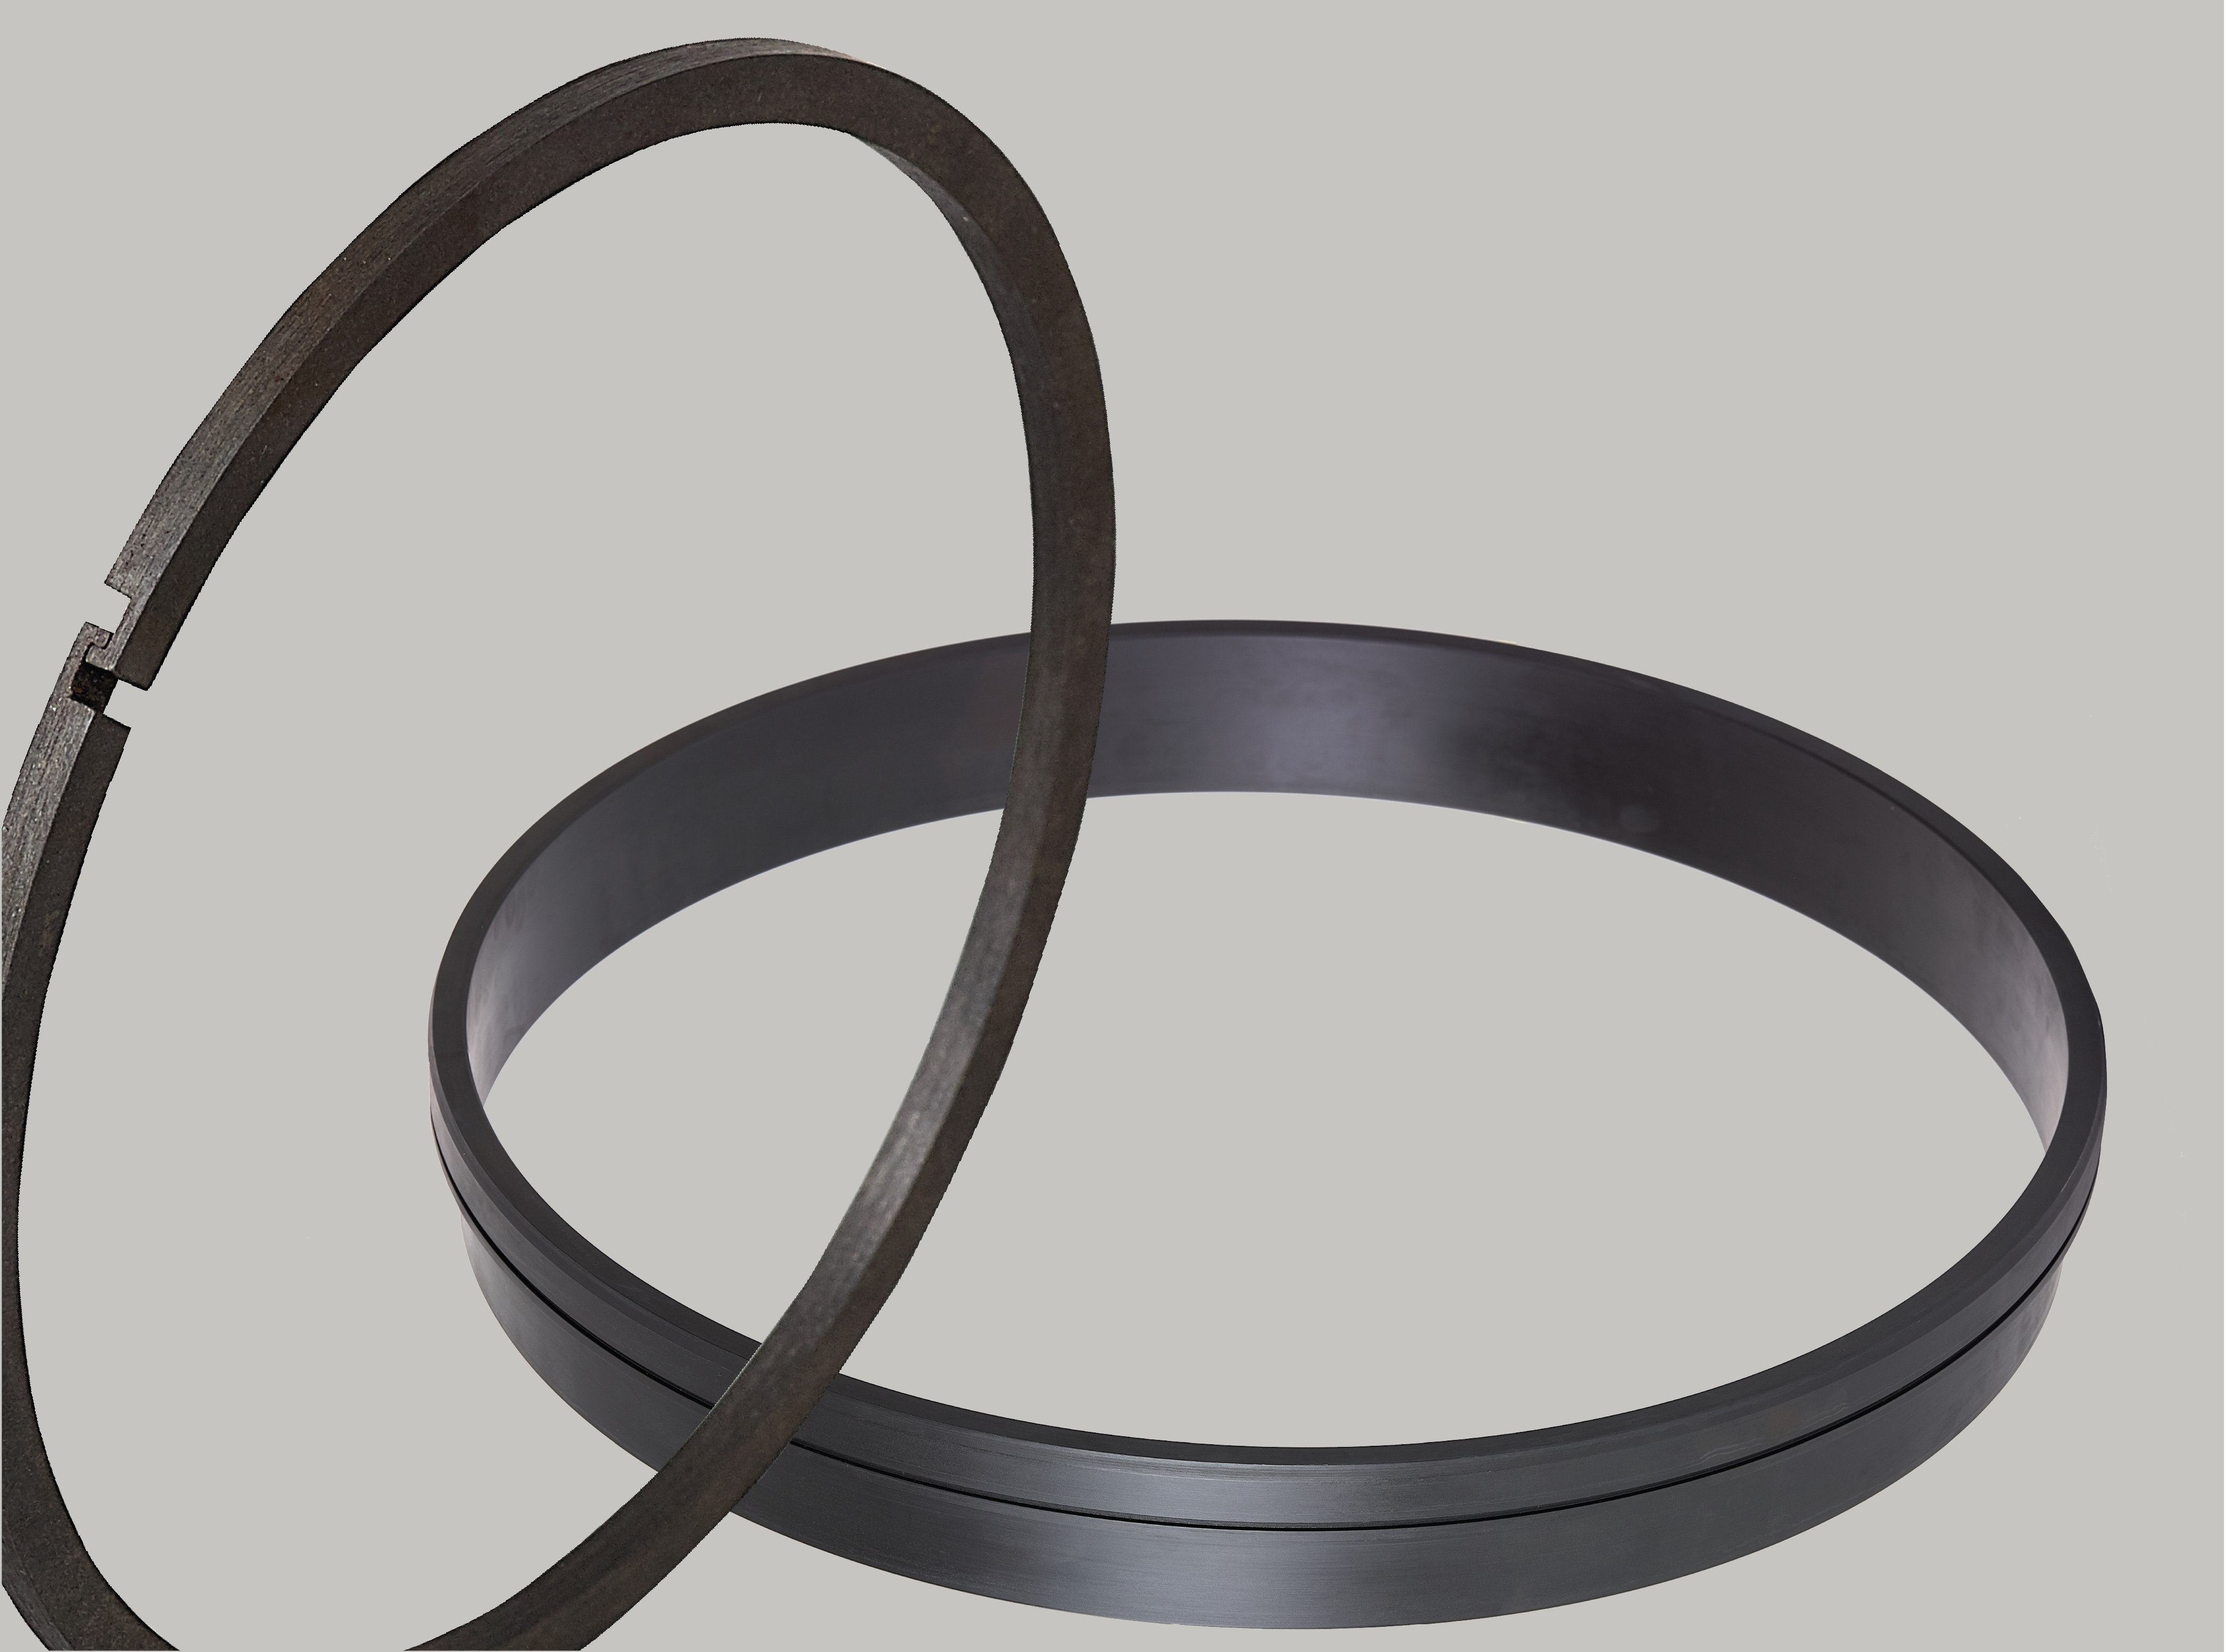 Leading Seal Manufacturer Specializing in Orings and Seals | Fitco Orings